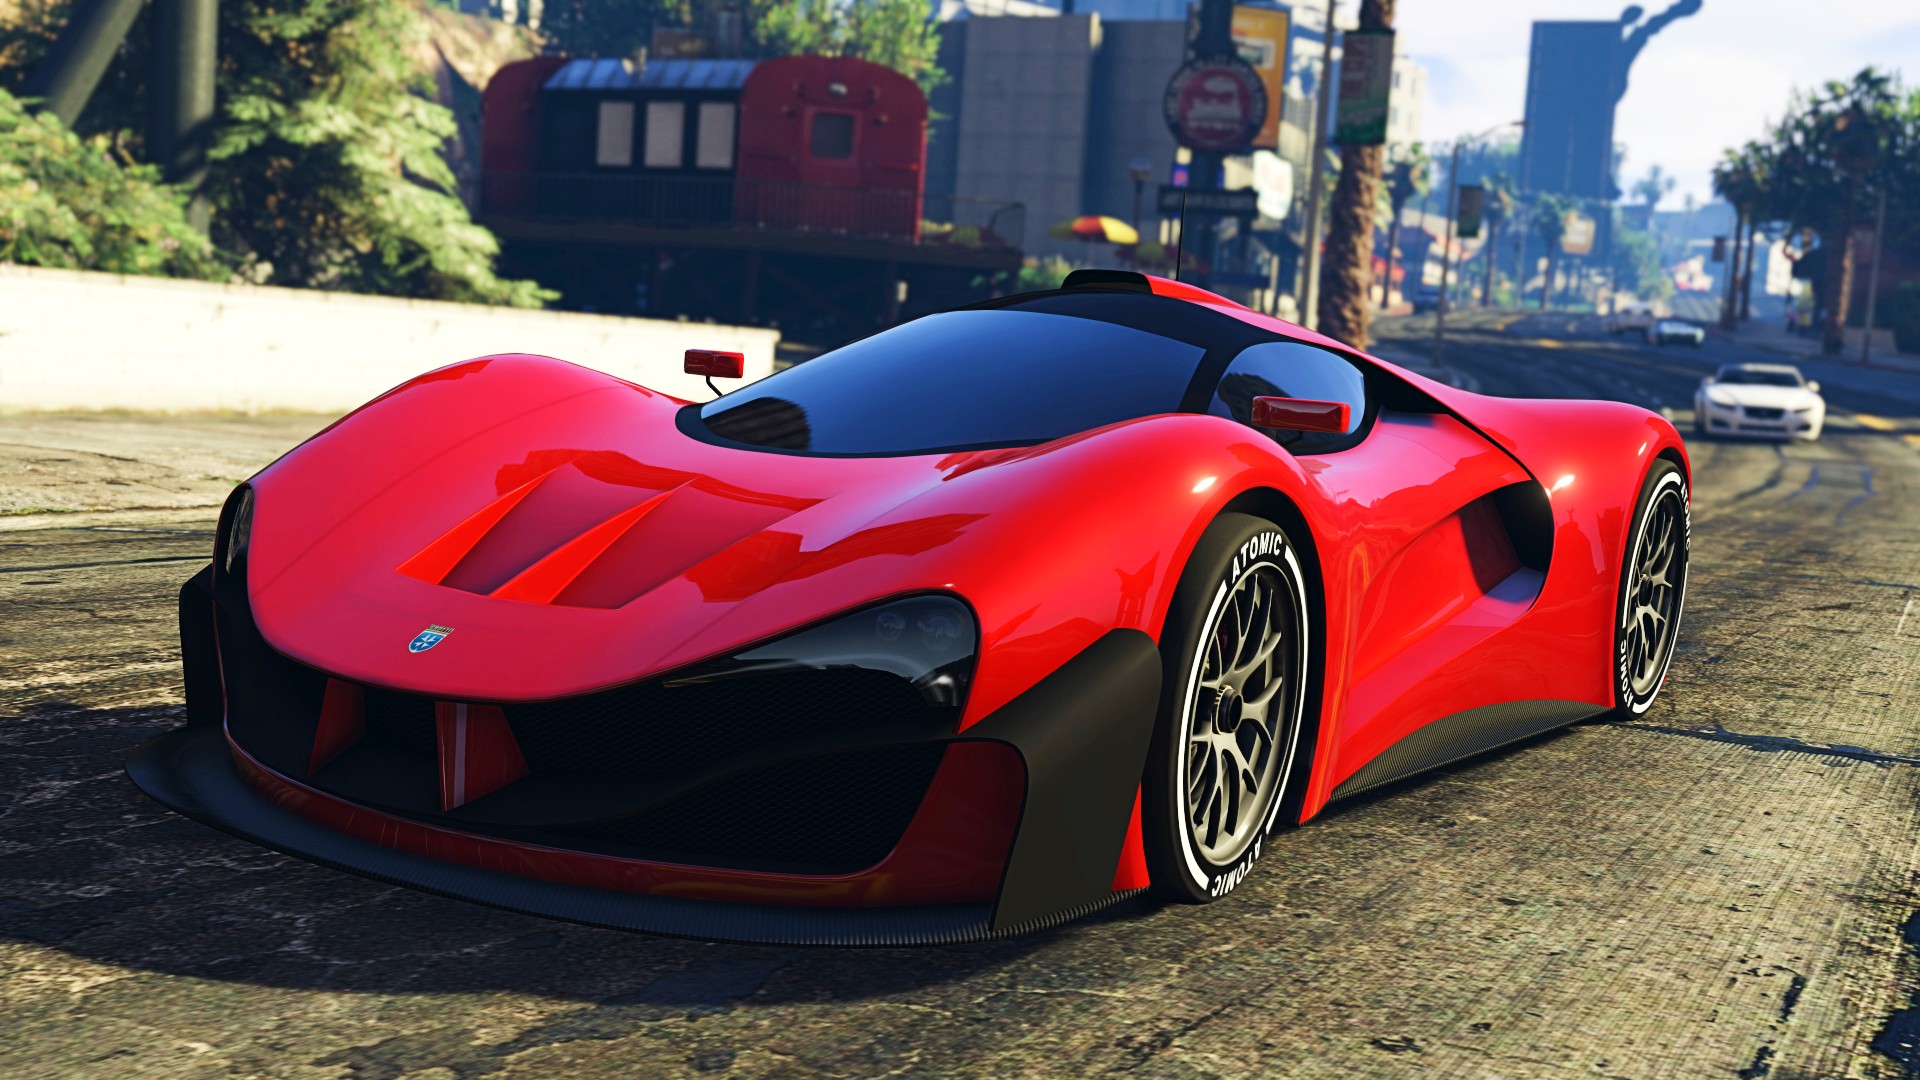 Grand Theft Auto 5: New PC Mod Delivers Photorealistic Graphics